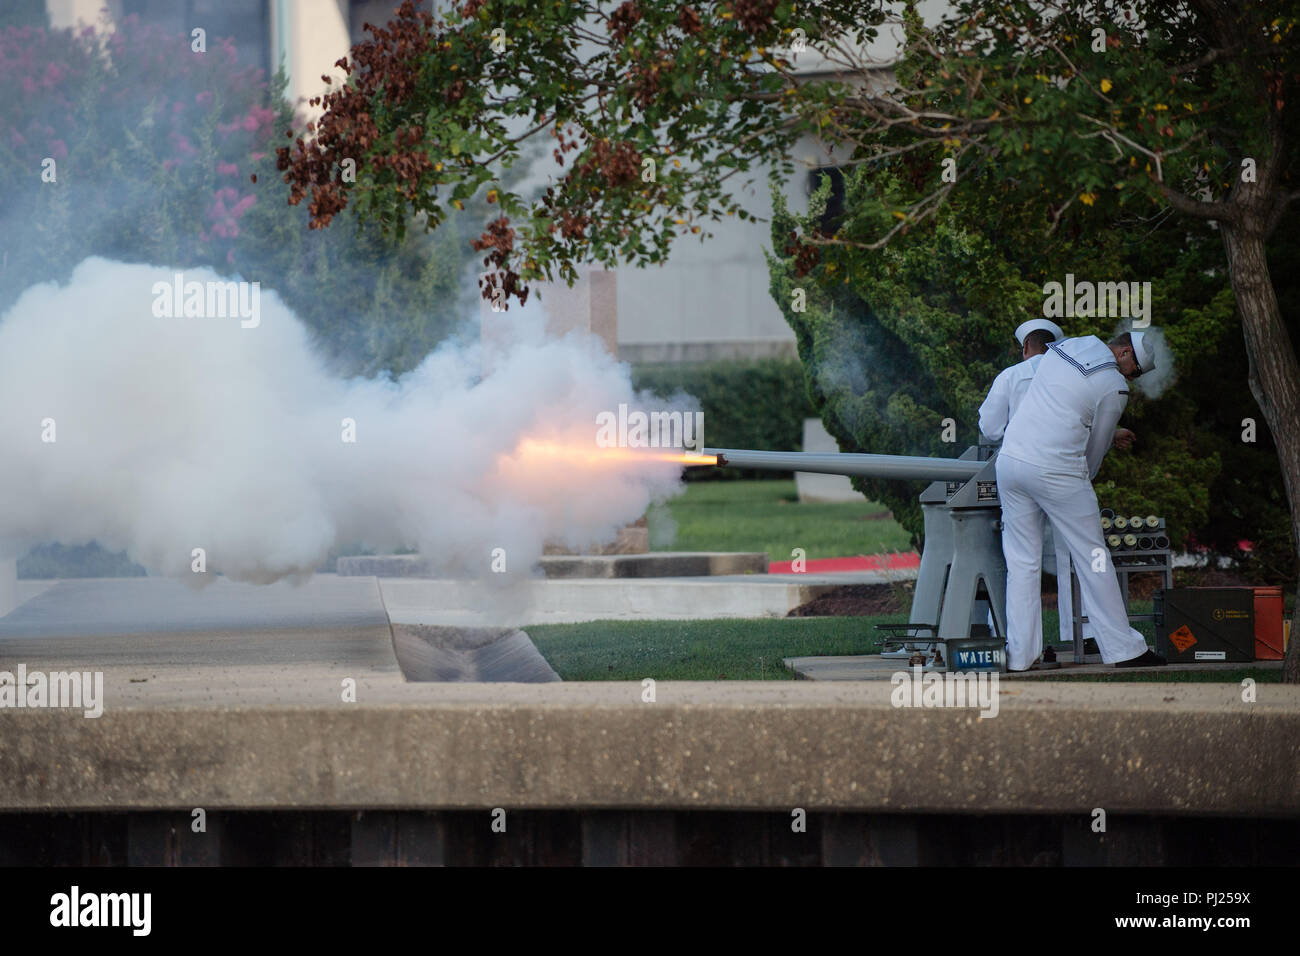 Midshipmen fire a 19-gun salute for Sen. John McCain as he is laid to rest at the United States Naval Academy Cemetery at Hospital Point September 2, 2018 in Annapolis, Maryland. John S. McCain, III graduated from the United States Naval Academy in 1958. He was a pilot in the United States Navy, a prisoner of war in Vietnam, a Congressmen and Senator and twice presidential candidate. He received numerous awards, including the Silver Star, Legion of Merit, Purple Heart, and Distinguished Flying Cross. Stock Photo